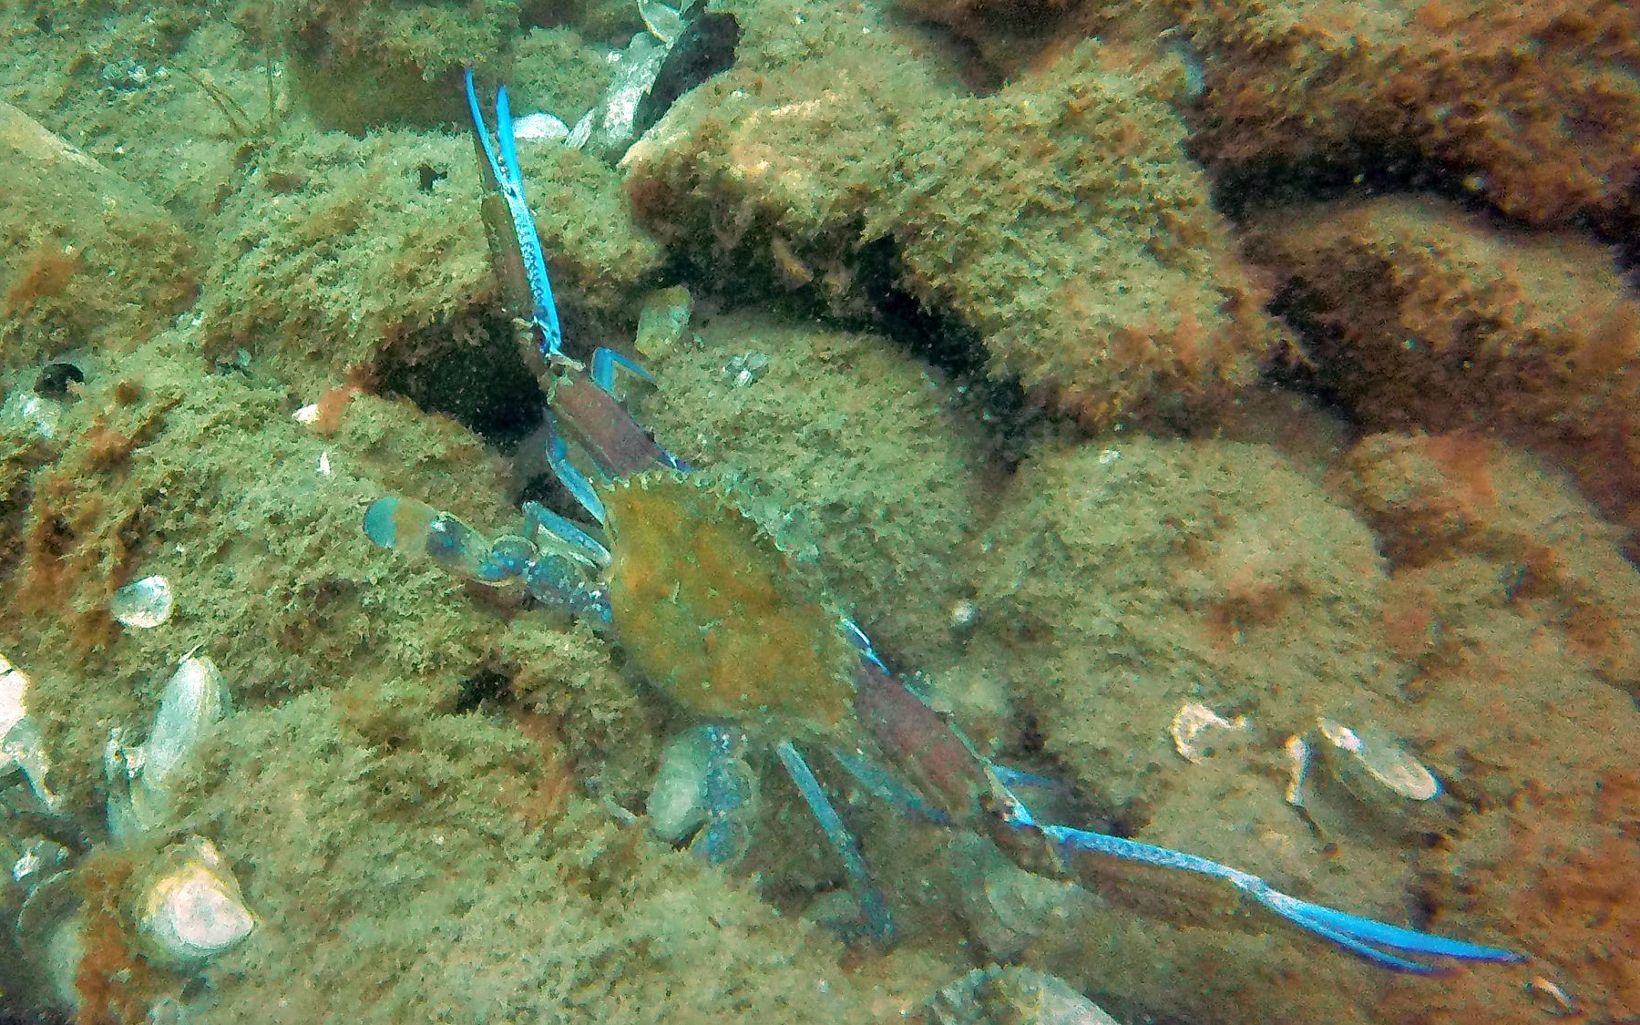 A brown and iridescent blue crab sitting on old oyster shells underwater.